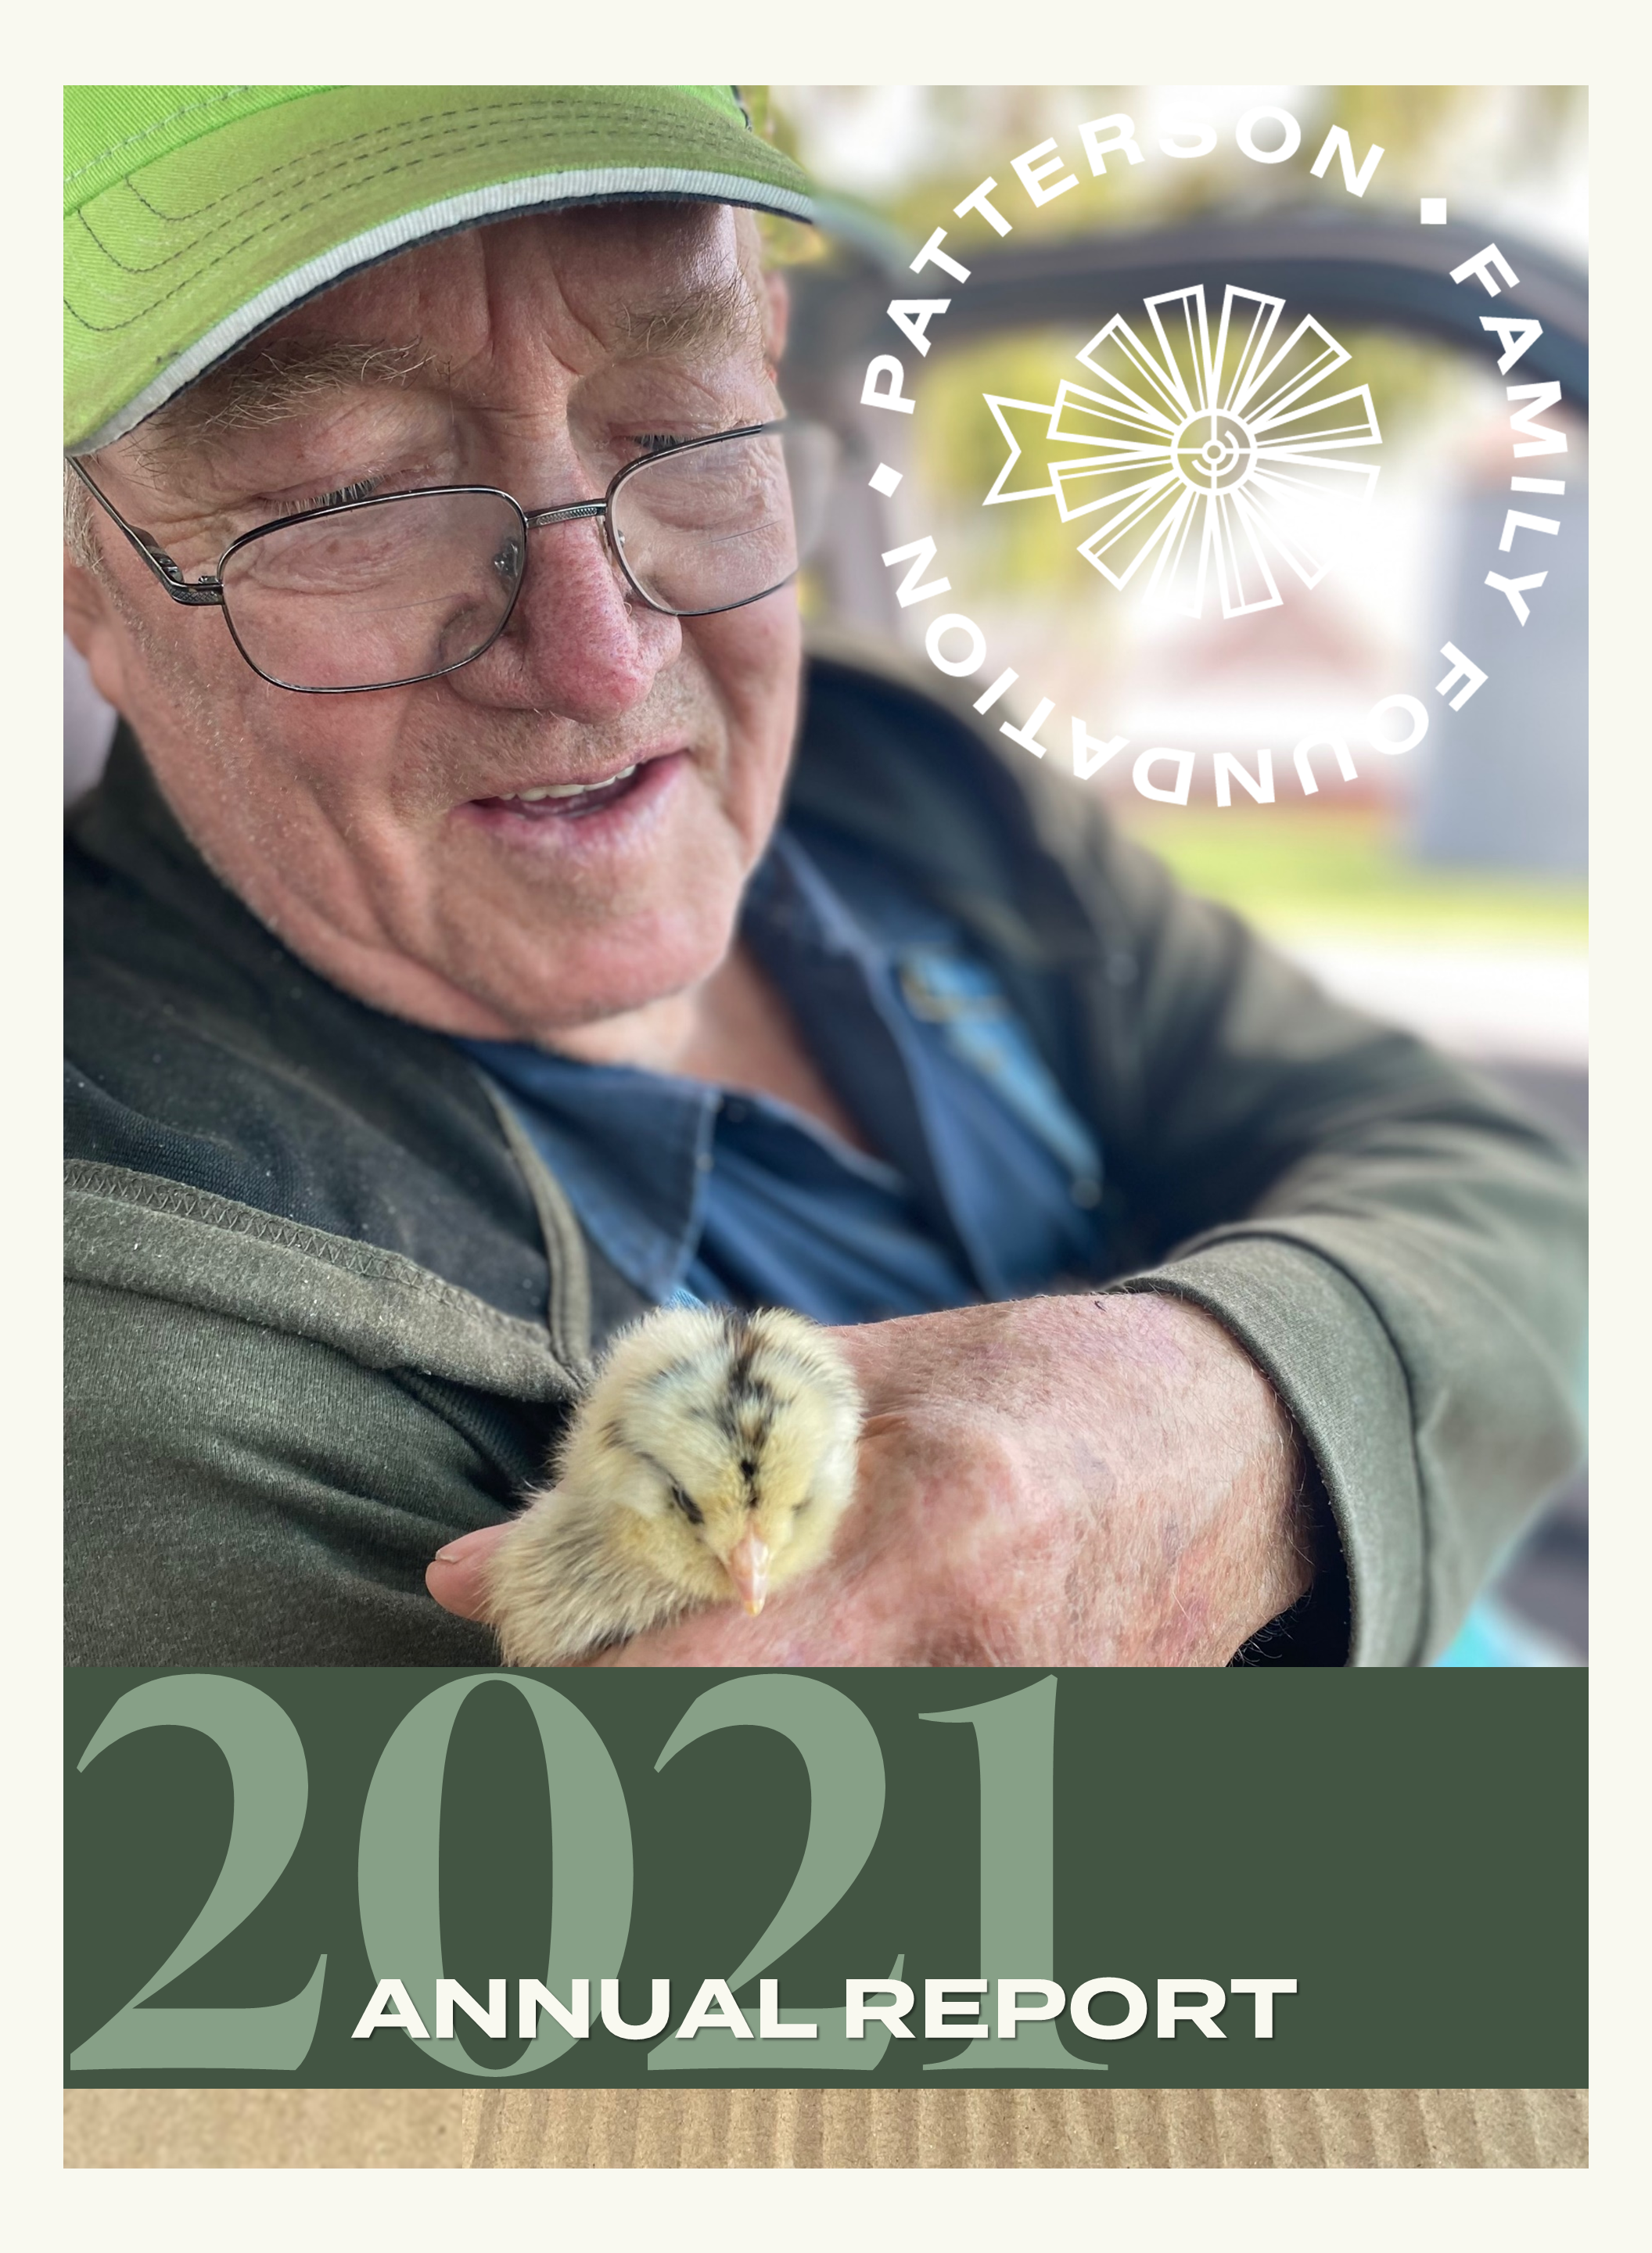 An elderly farmer with glasses, a chambray shirt, and a bright green baseball cap holds a yellow newborn chick.